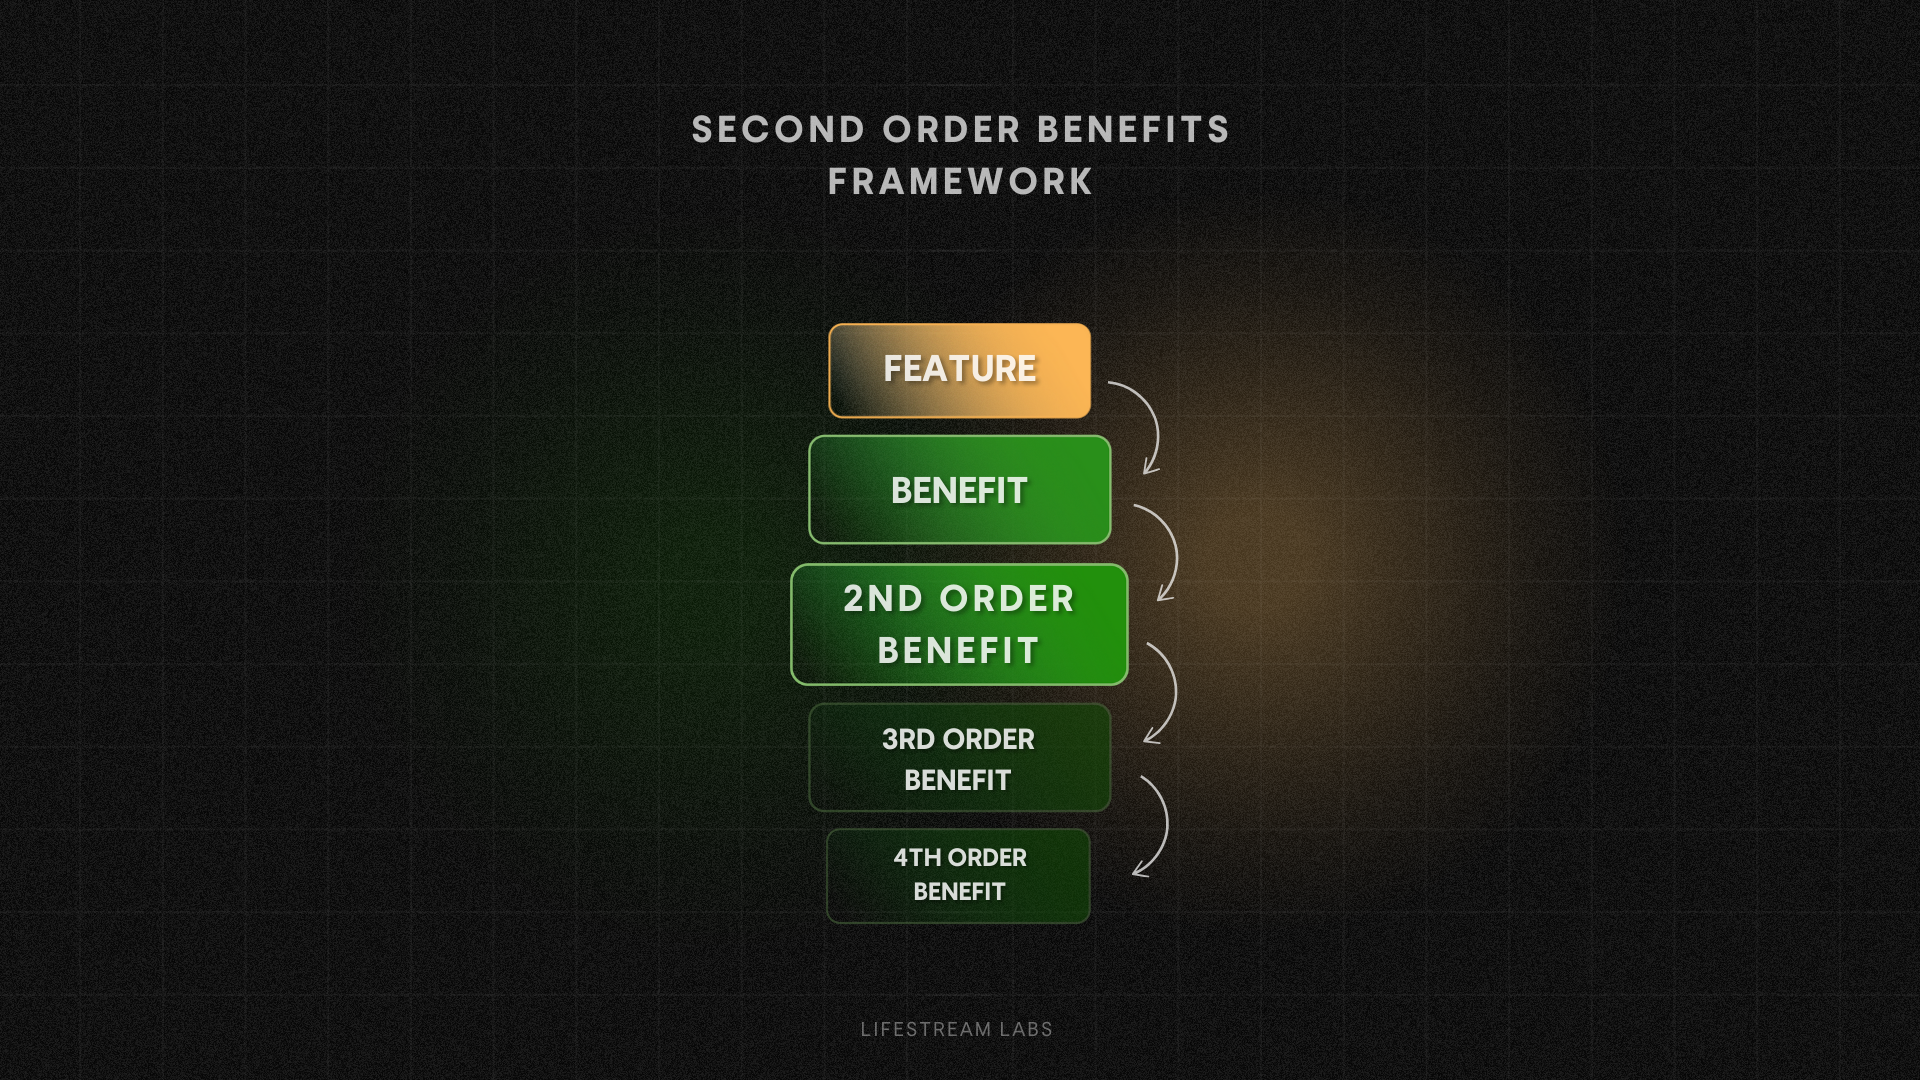 Access Customer's Subconscious with The Second Order Benefits Framework